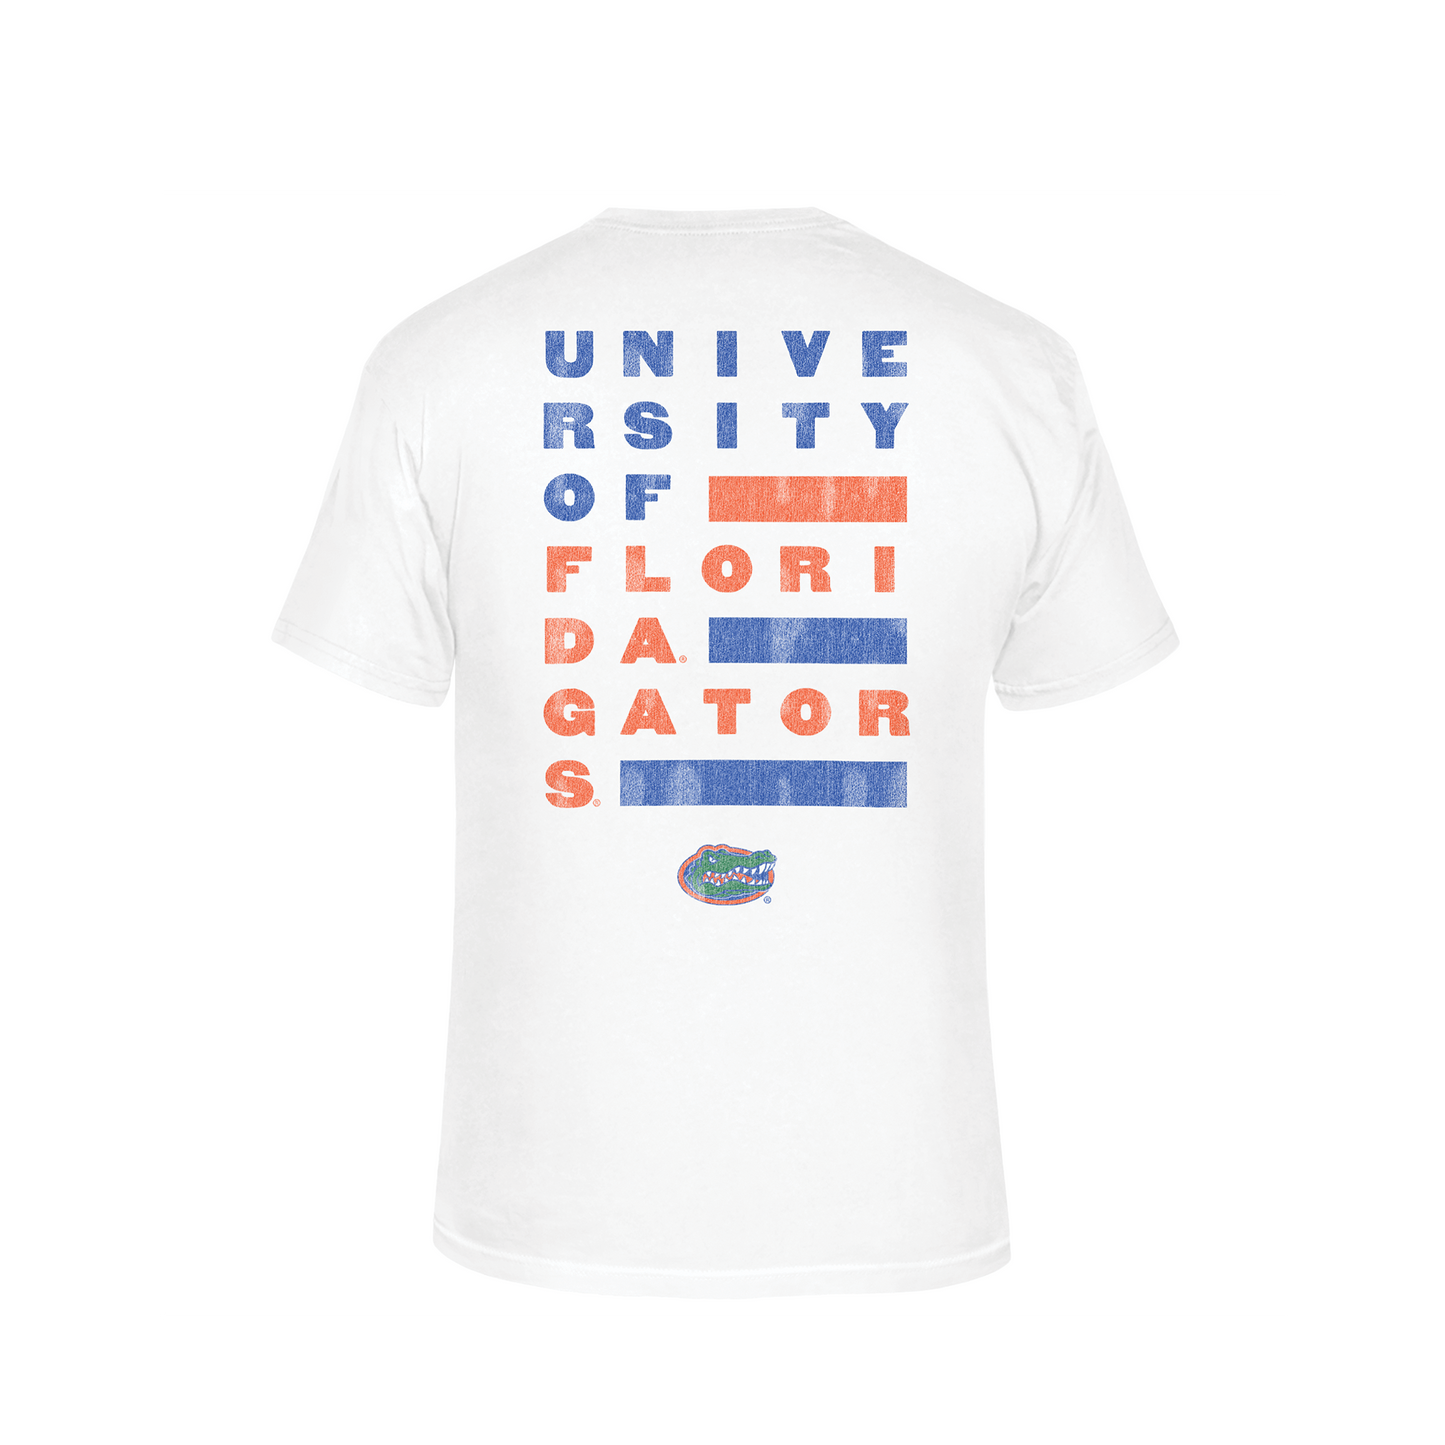 Tom Petty Day x Florida Collection- Game Day Tee